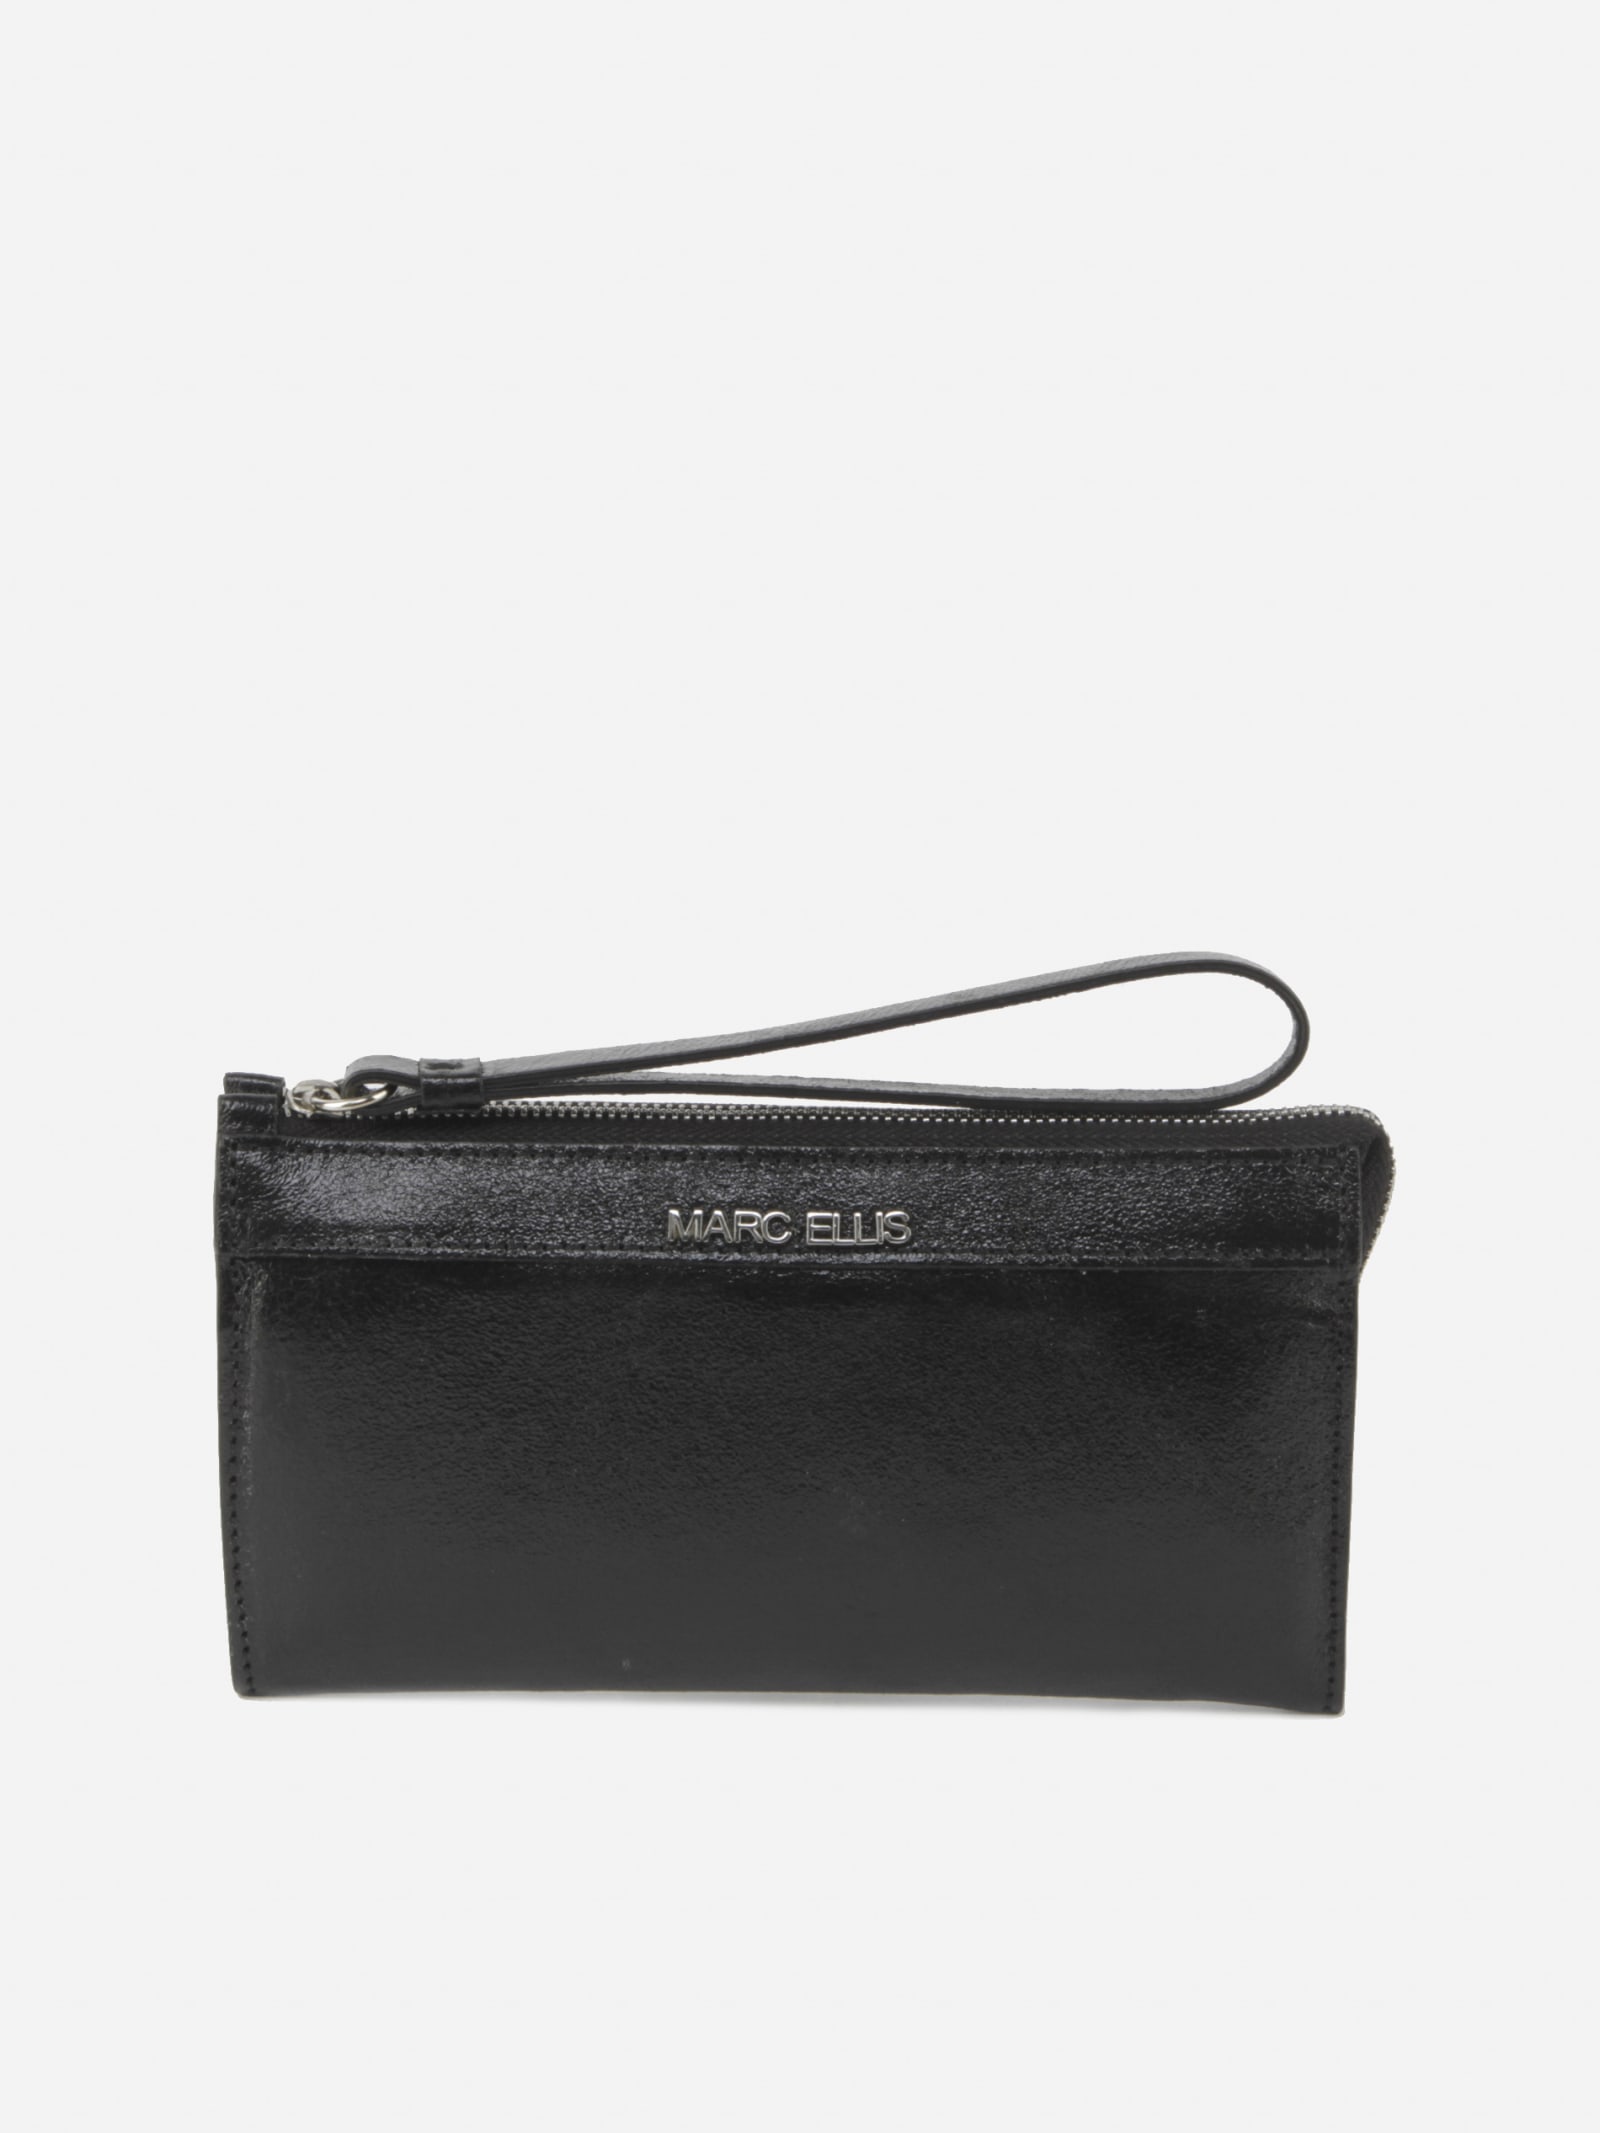 Marc Ellis Jenna Piper Wallet In Laminated Effect Leather